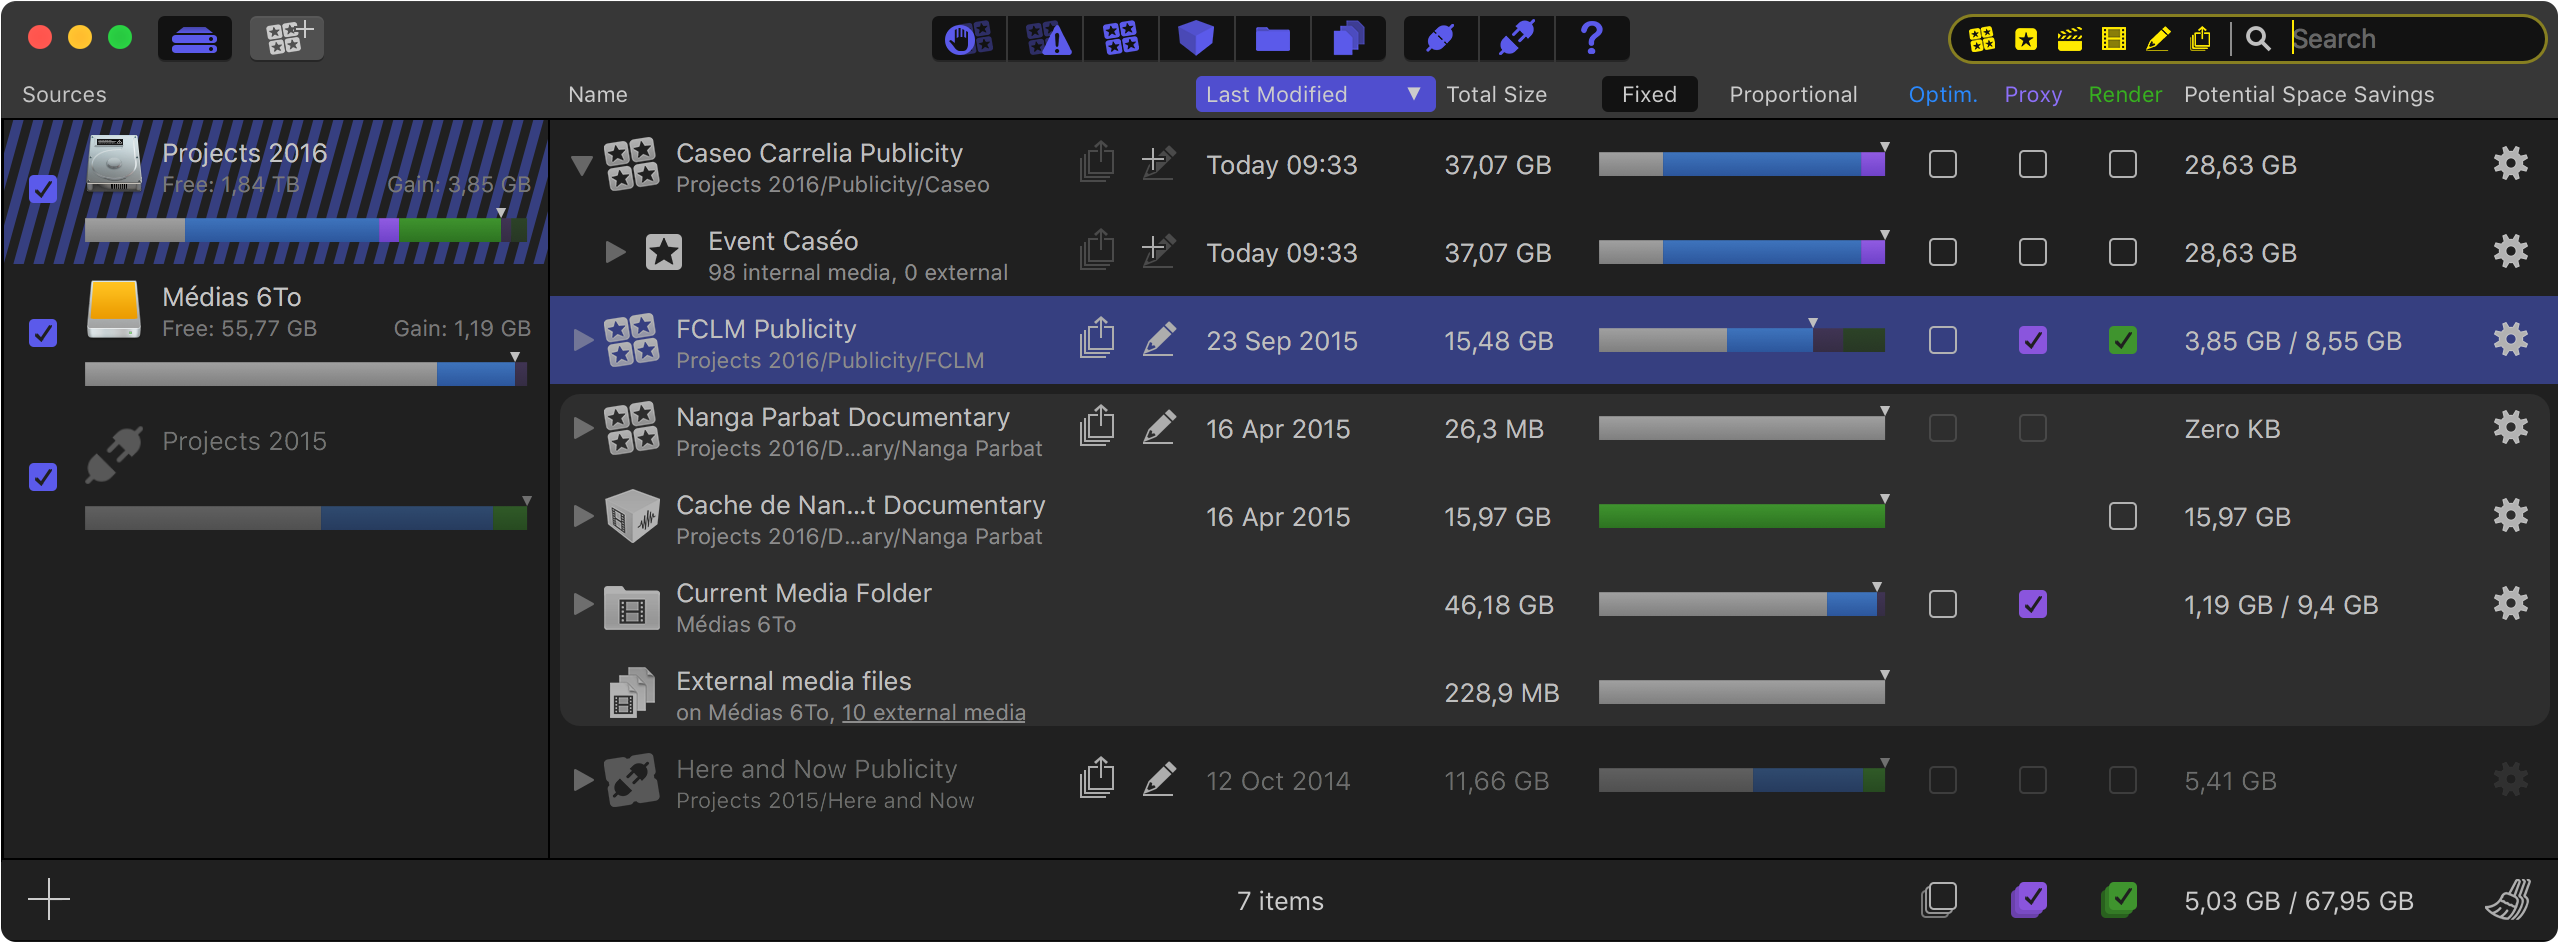 final cut pro free download for windows torrent